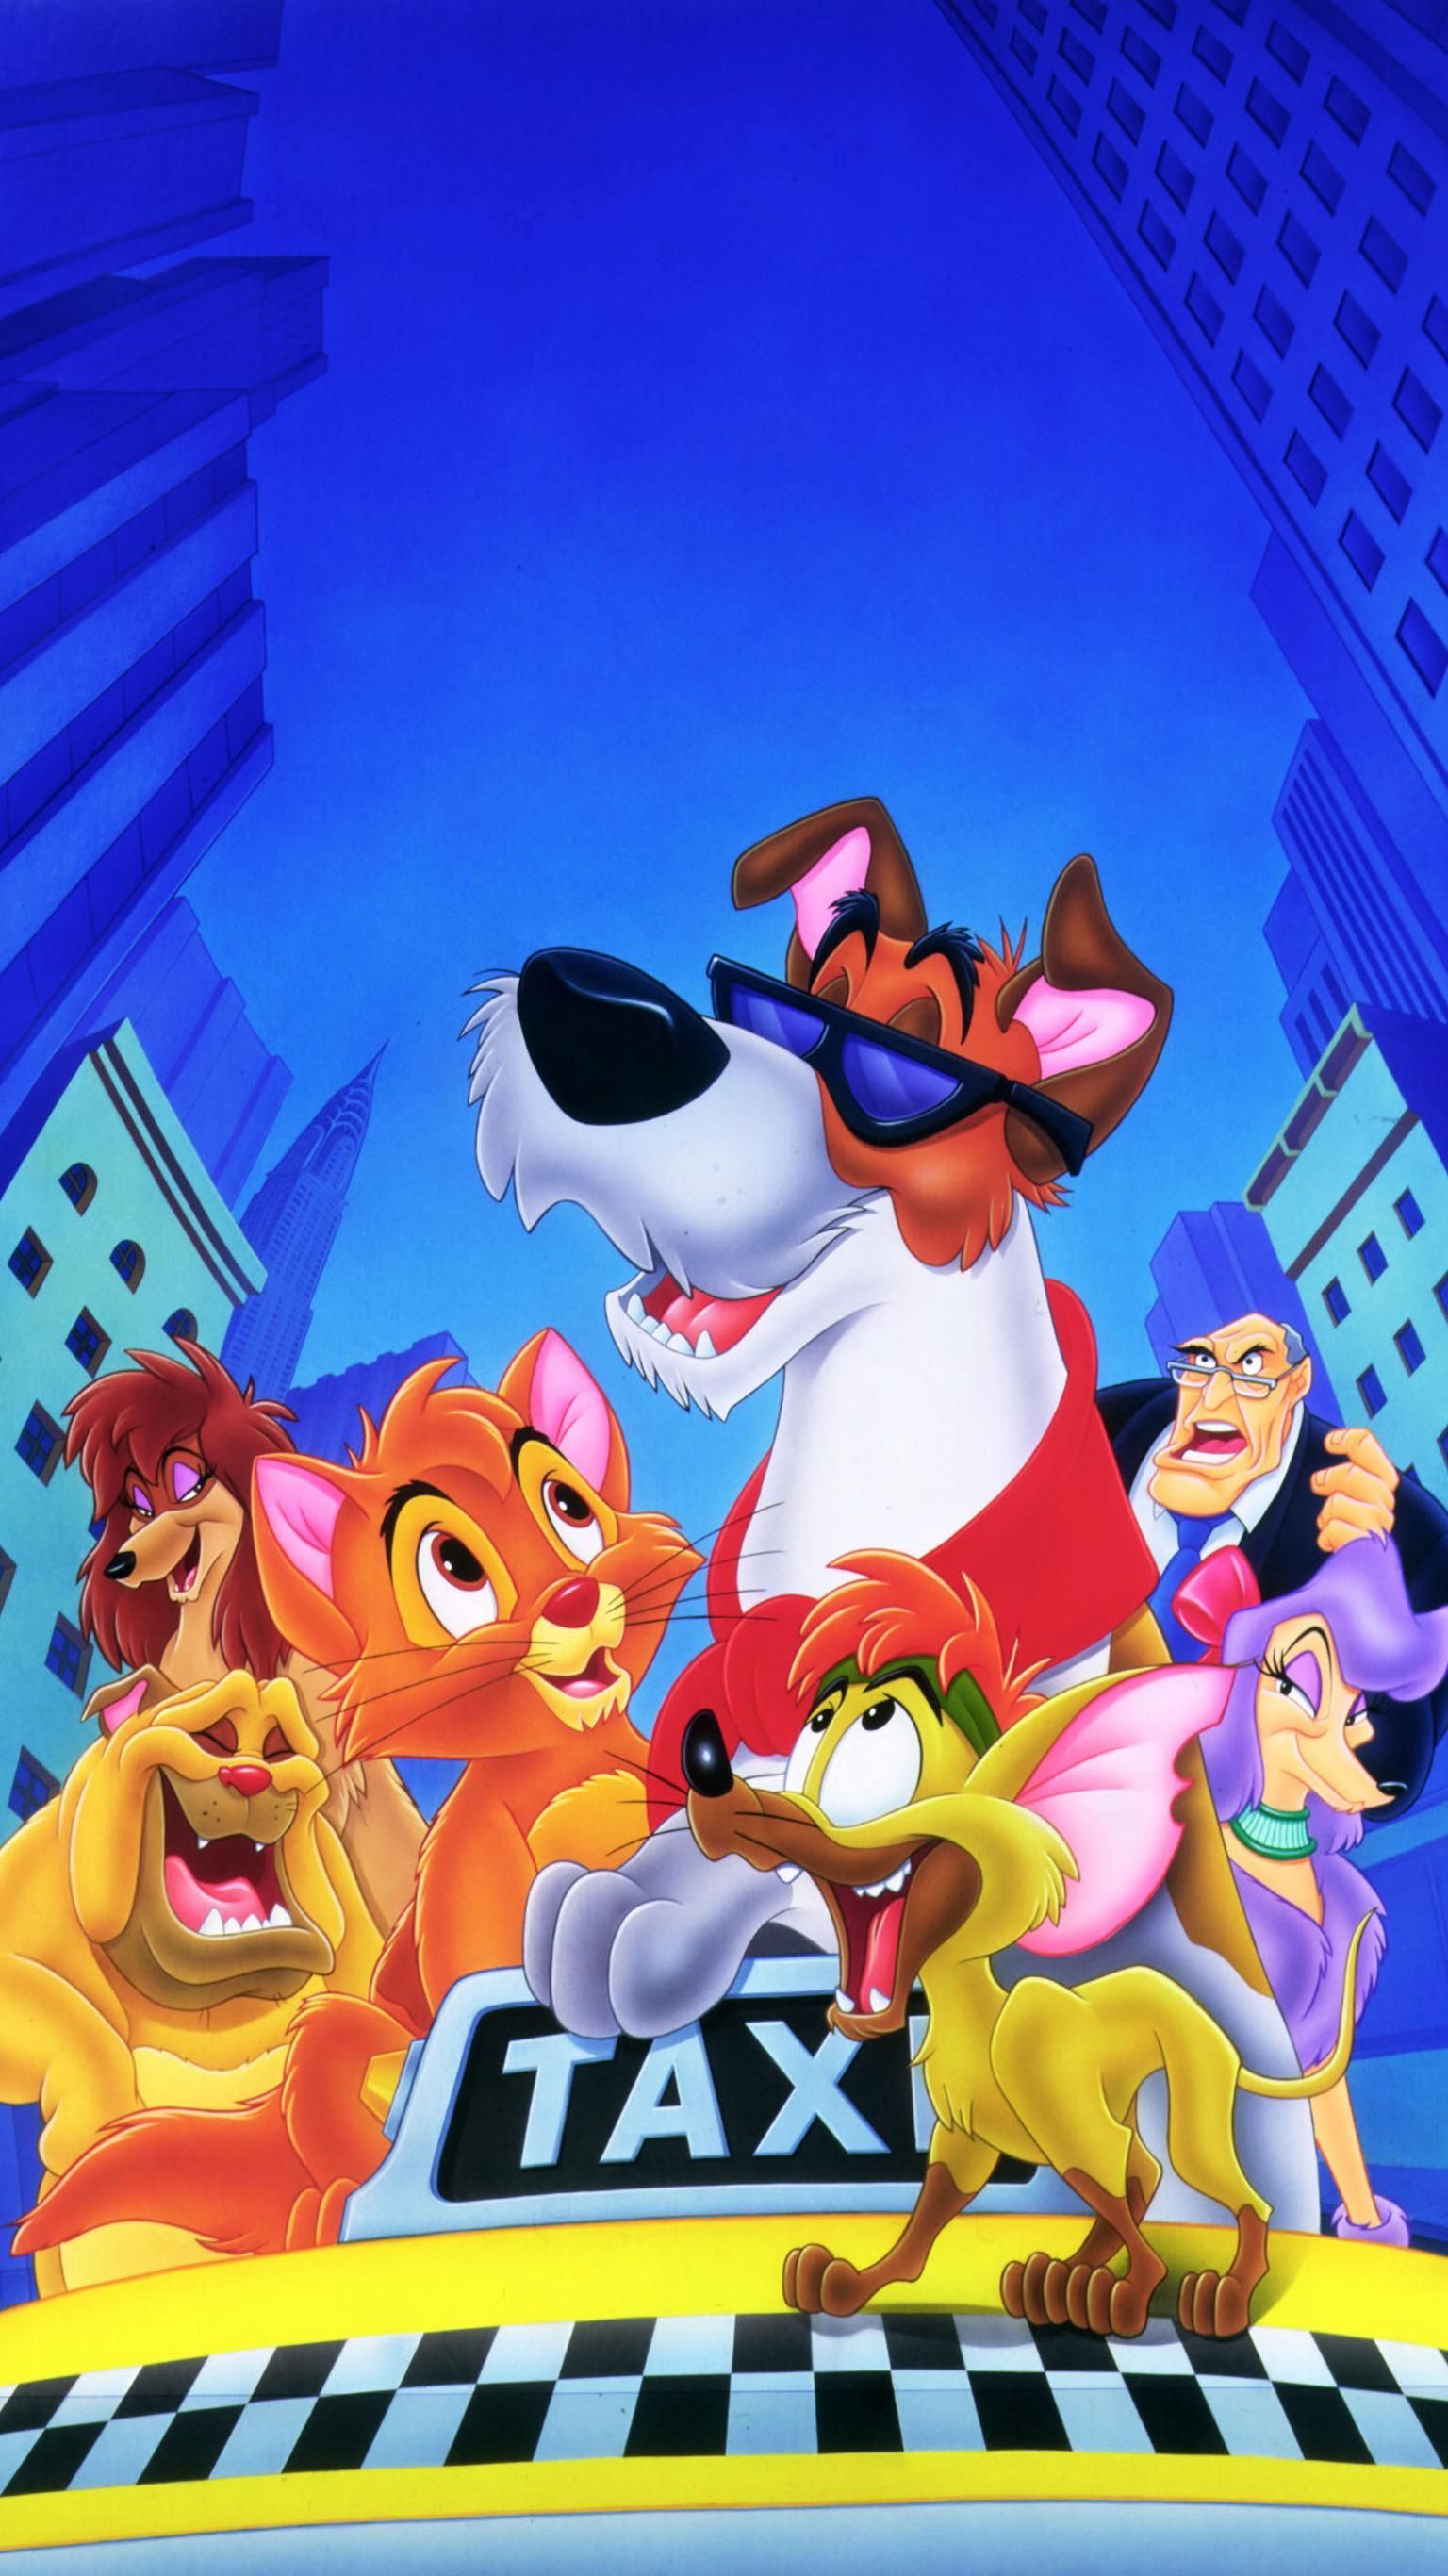 Oliver & Company (1988) Phone Wallpaper. Moviemania. Disney pixar characters, iPhone background disney, Oliver and company